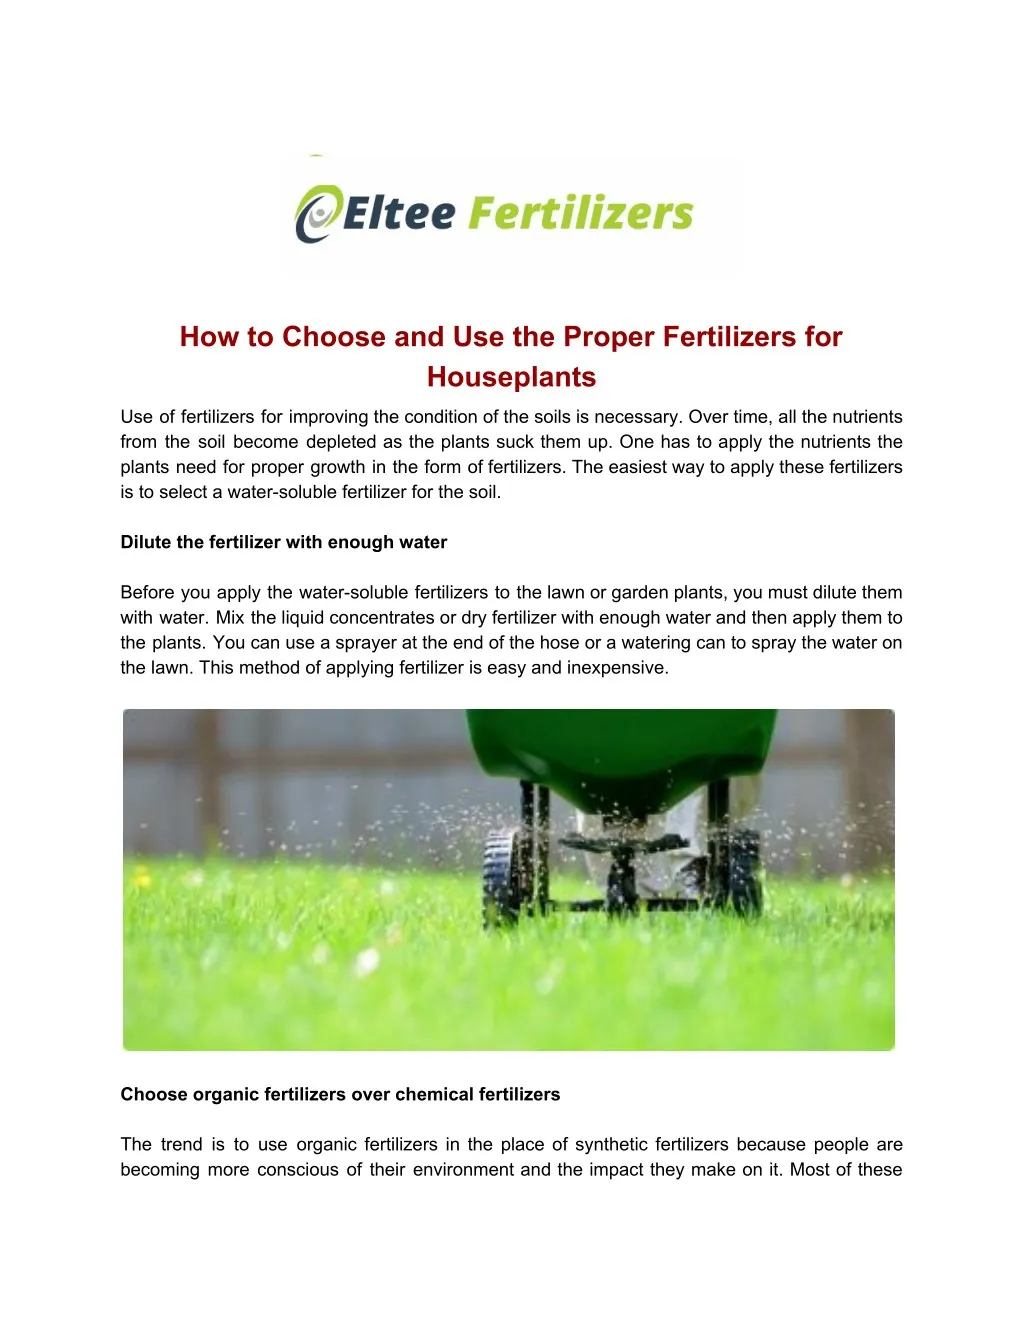 how to choose and use the proper fertilizers